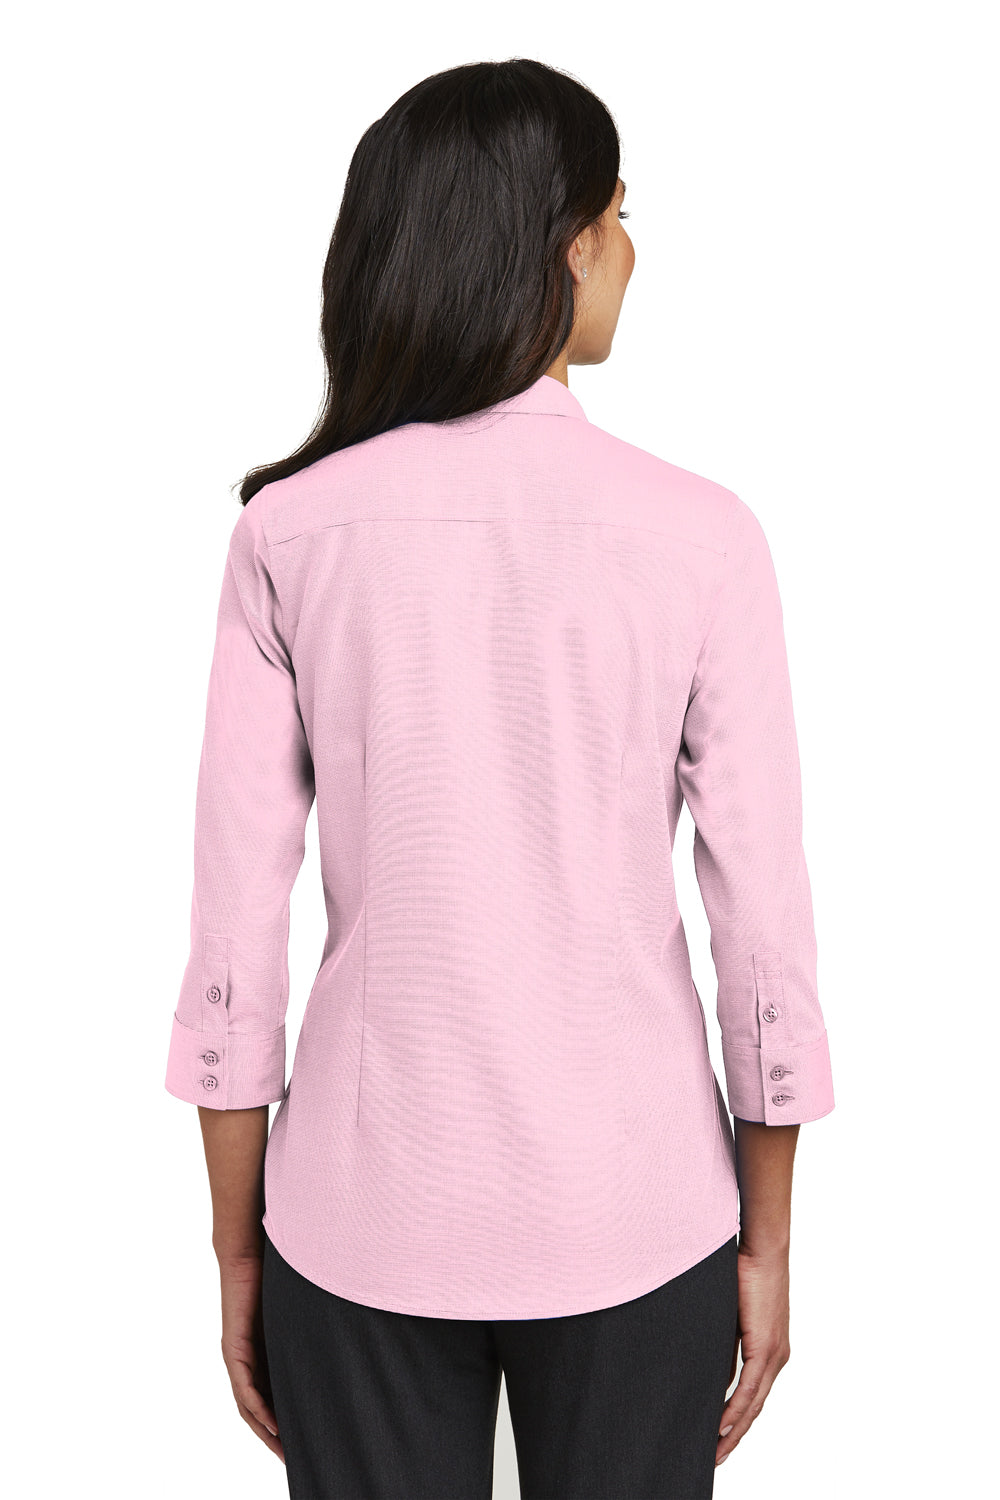 Red House RH690 Womens Nailhead Wrinkle Resistant 3/4 Sleeve Button Down Shirt Pink Back